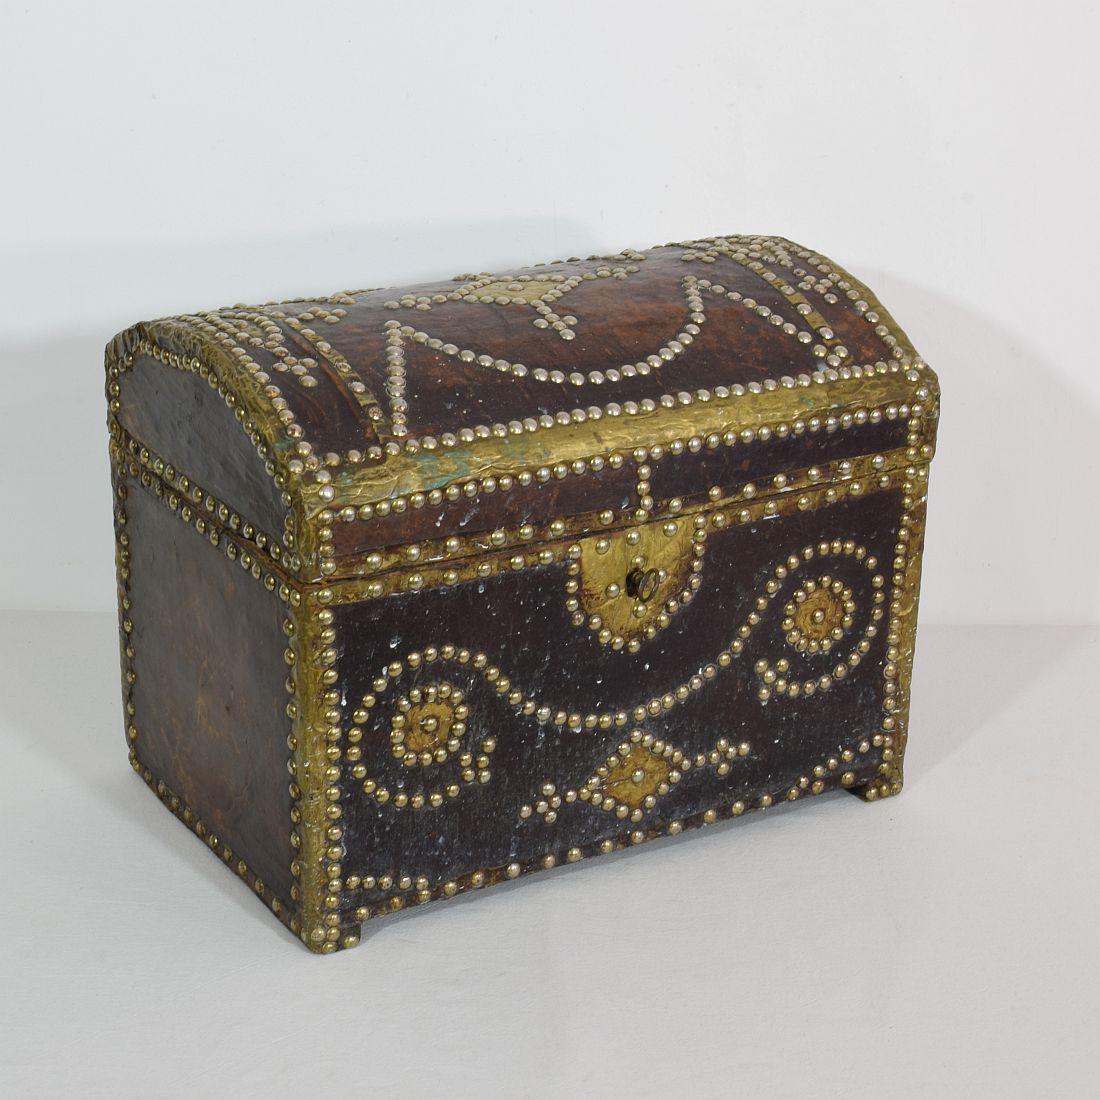 Beautiful weathered Folk Art box made out of wood and covered with leather. Working lock and key.
France, circa 1850
Weathered, small losses.